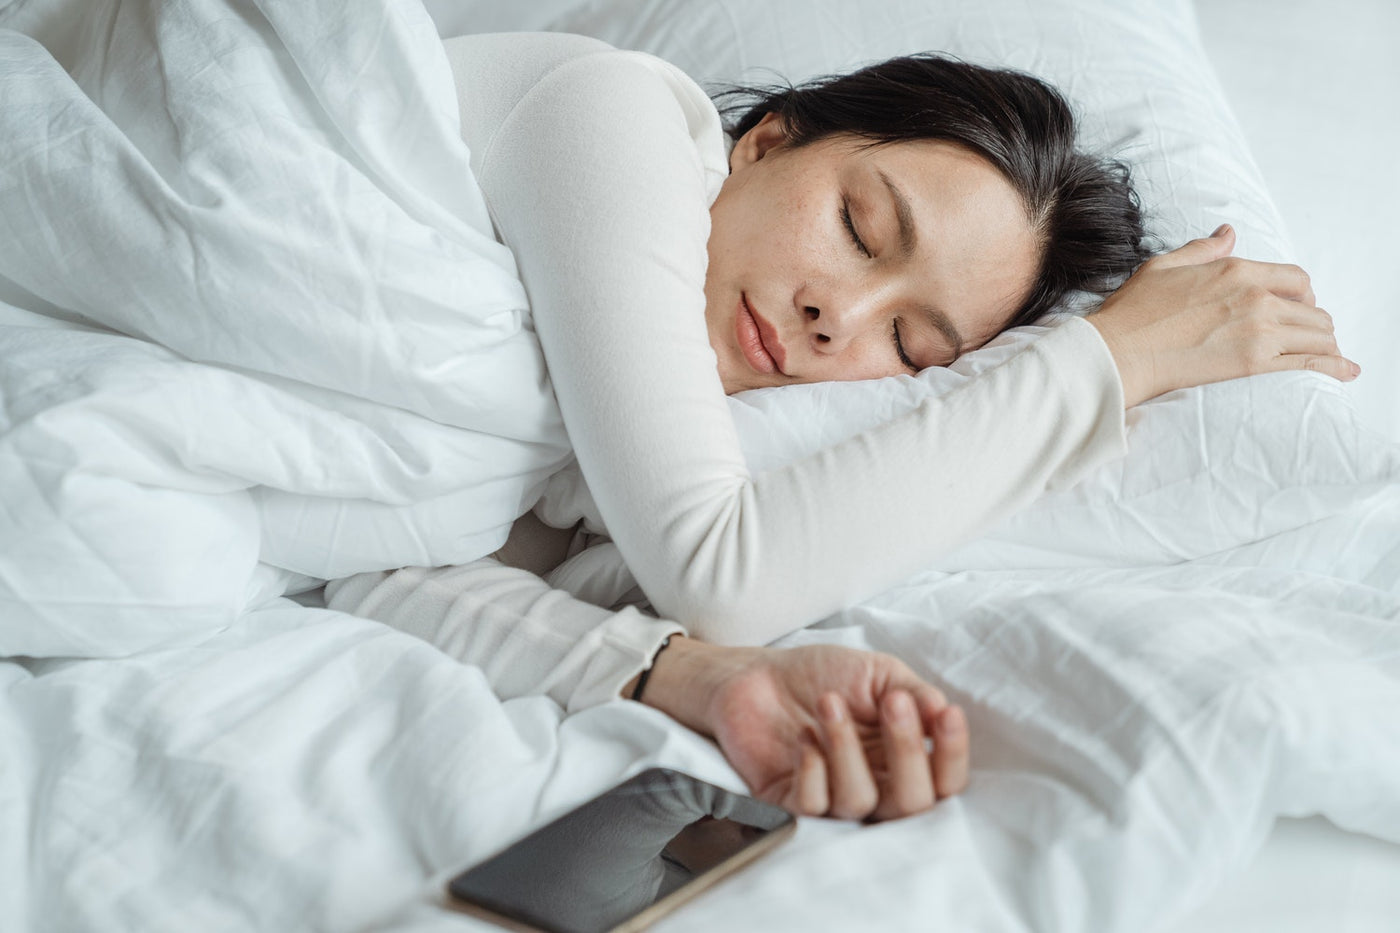 7 Helpful Tips To Stop Scrolling Before Bed